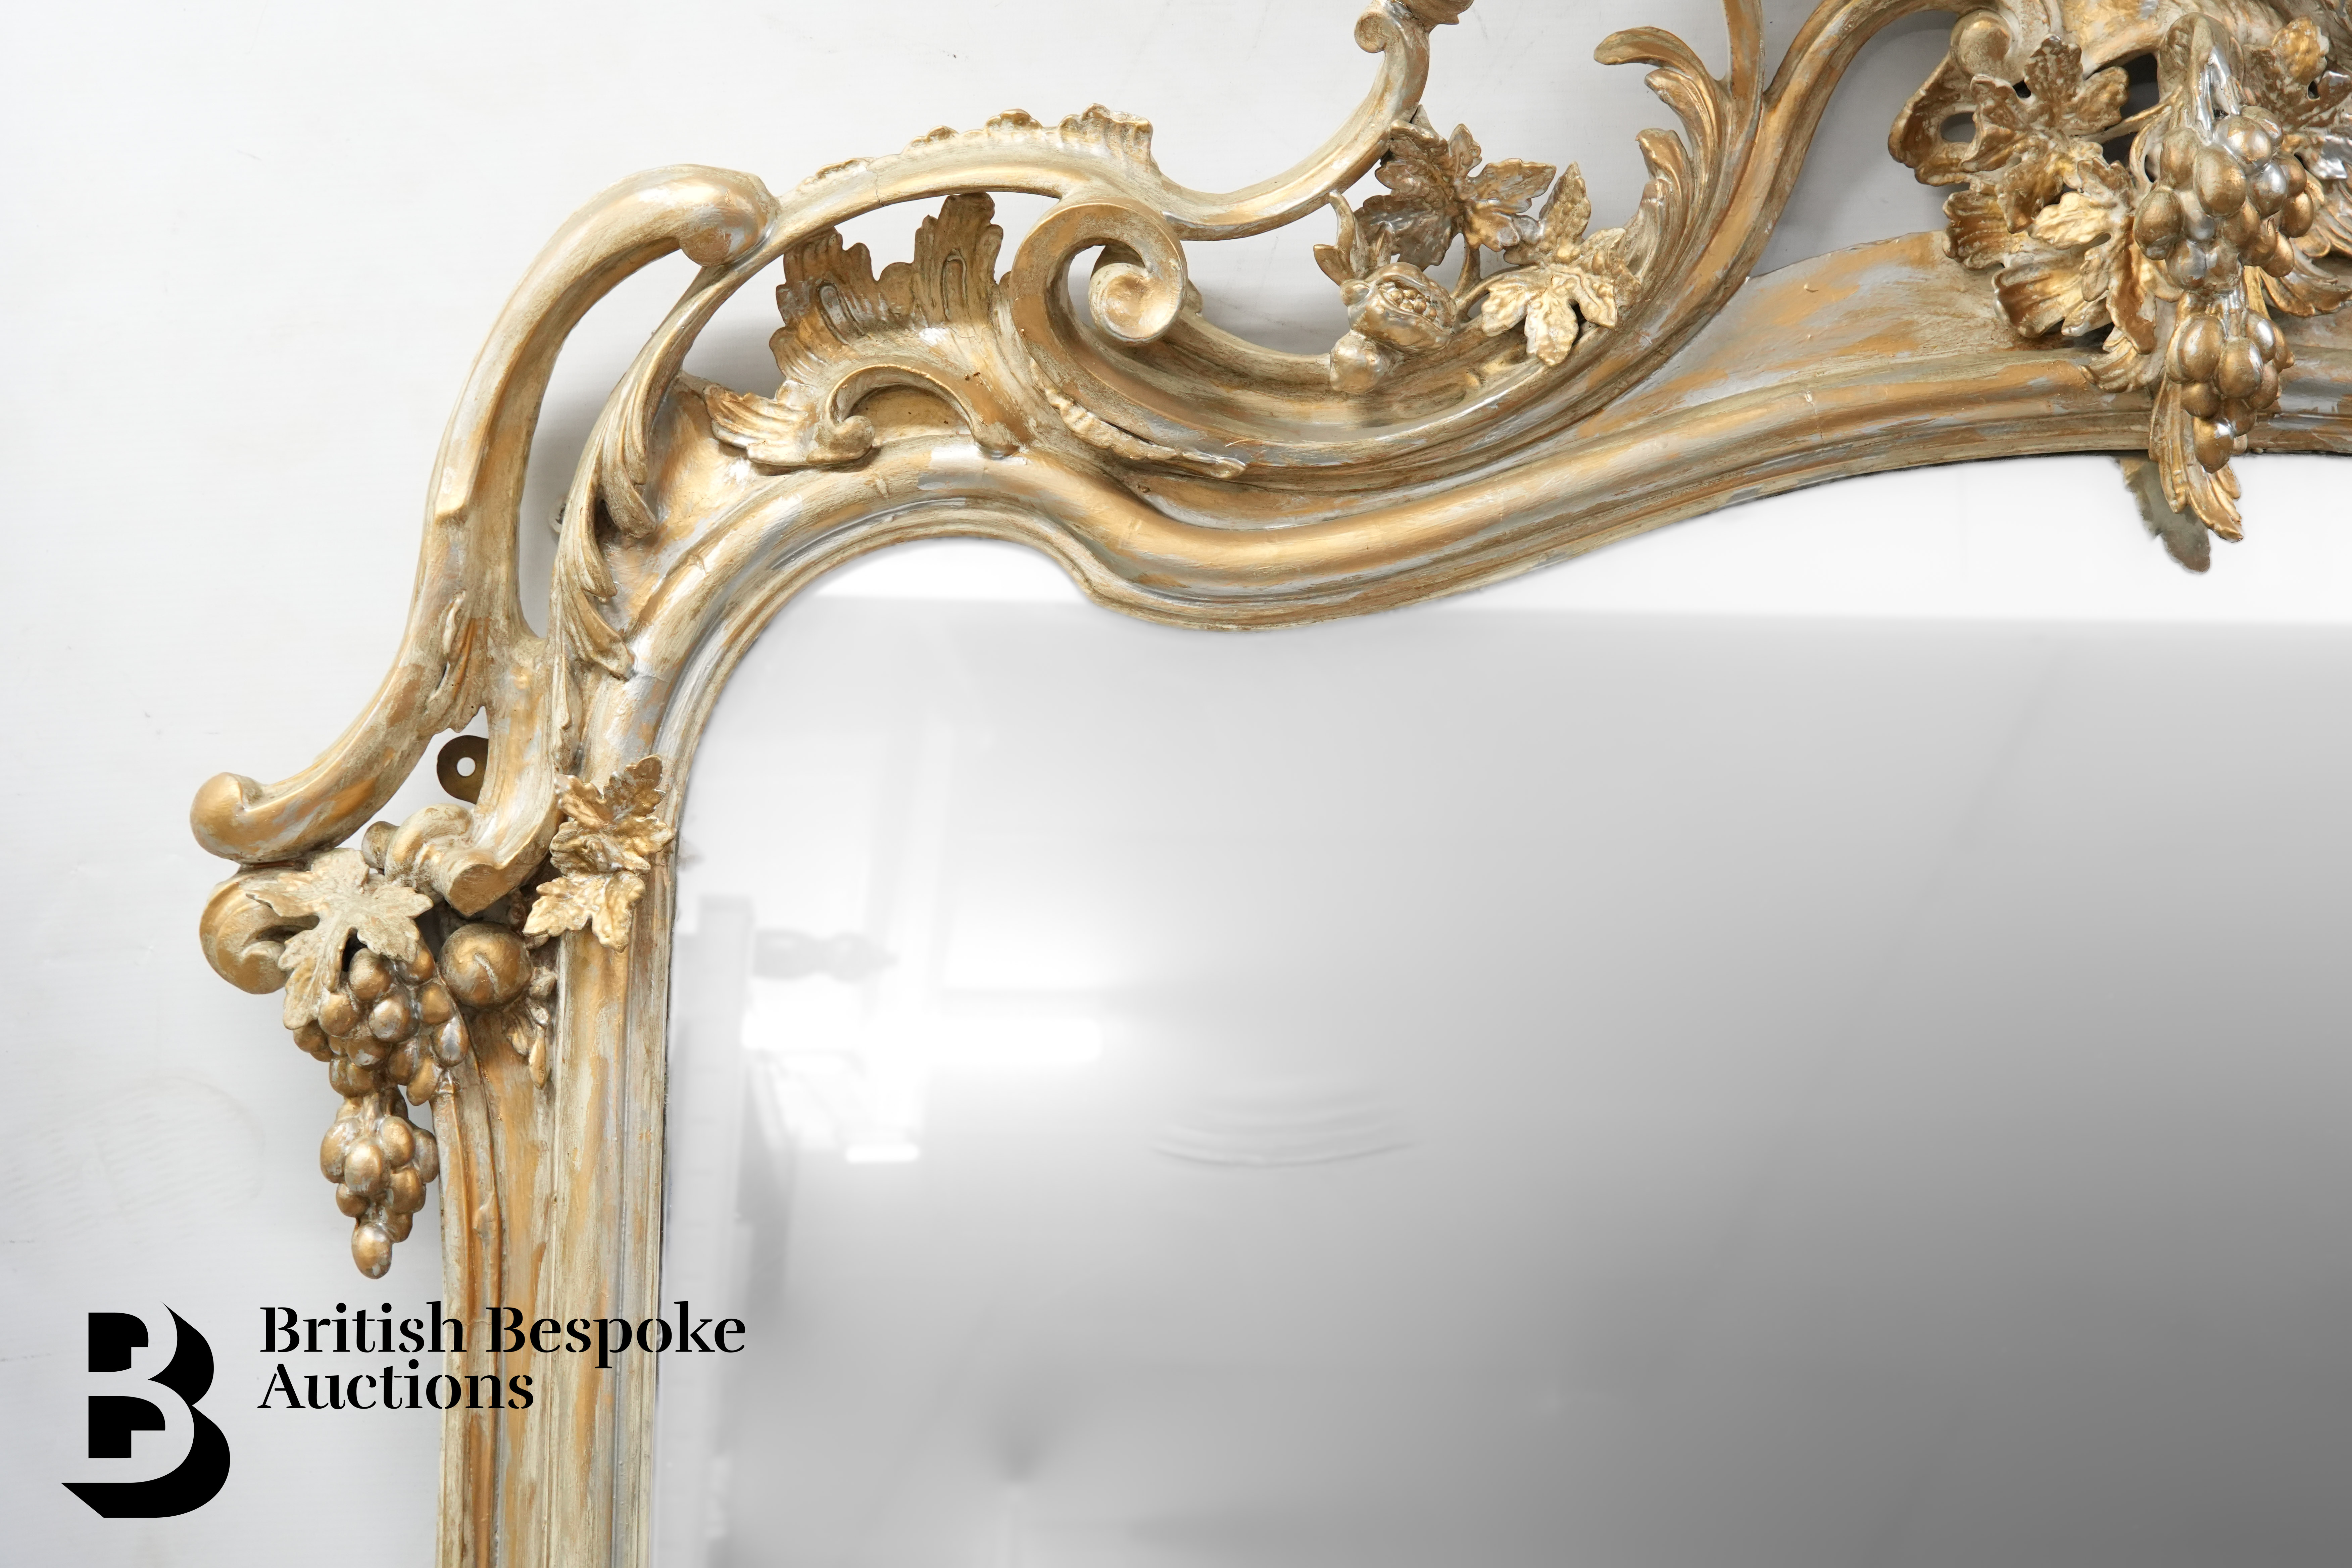 Substantial 20th Century Gilt Mirror - Image 3 of 9